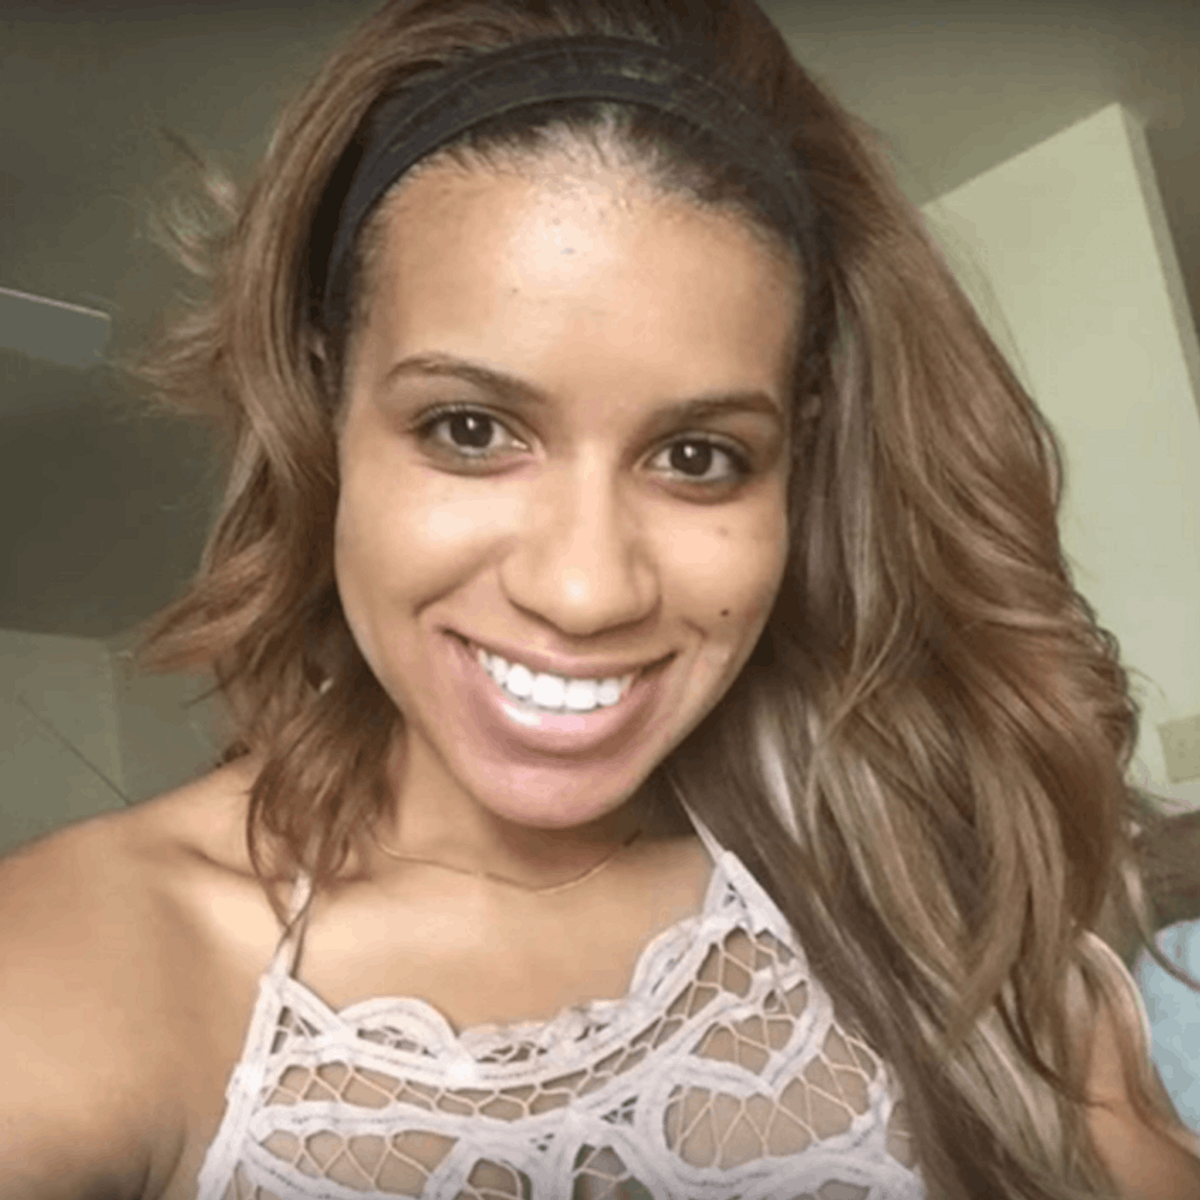 This Beauty Vlogger Posted Makeup-Free Selfies on Tinder + This Is What Happened